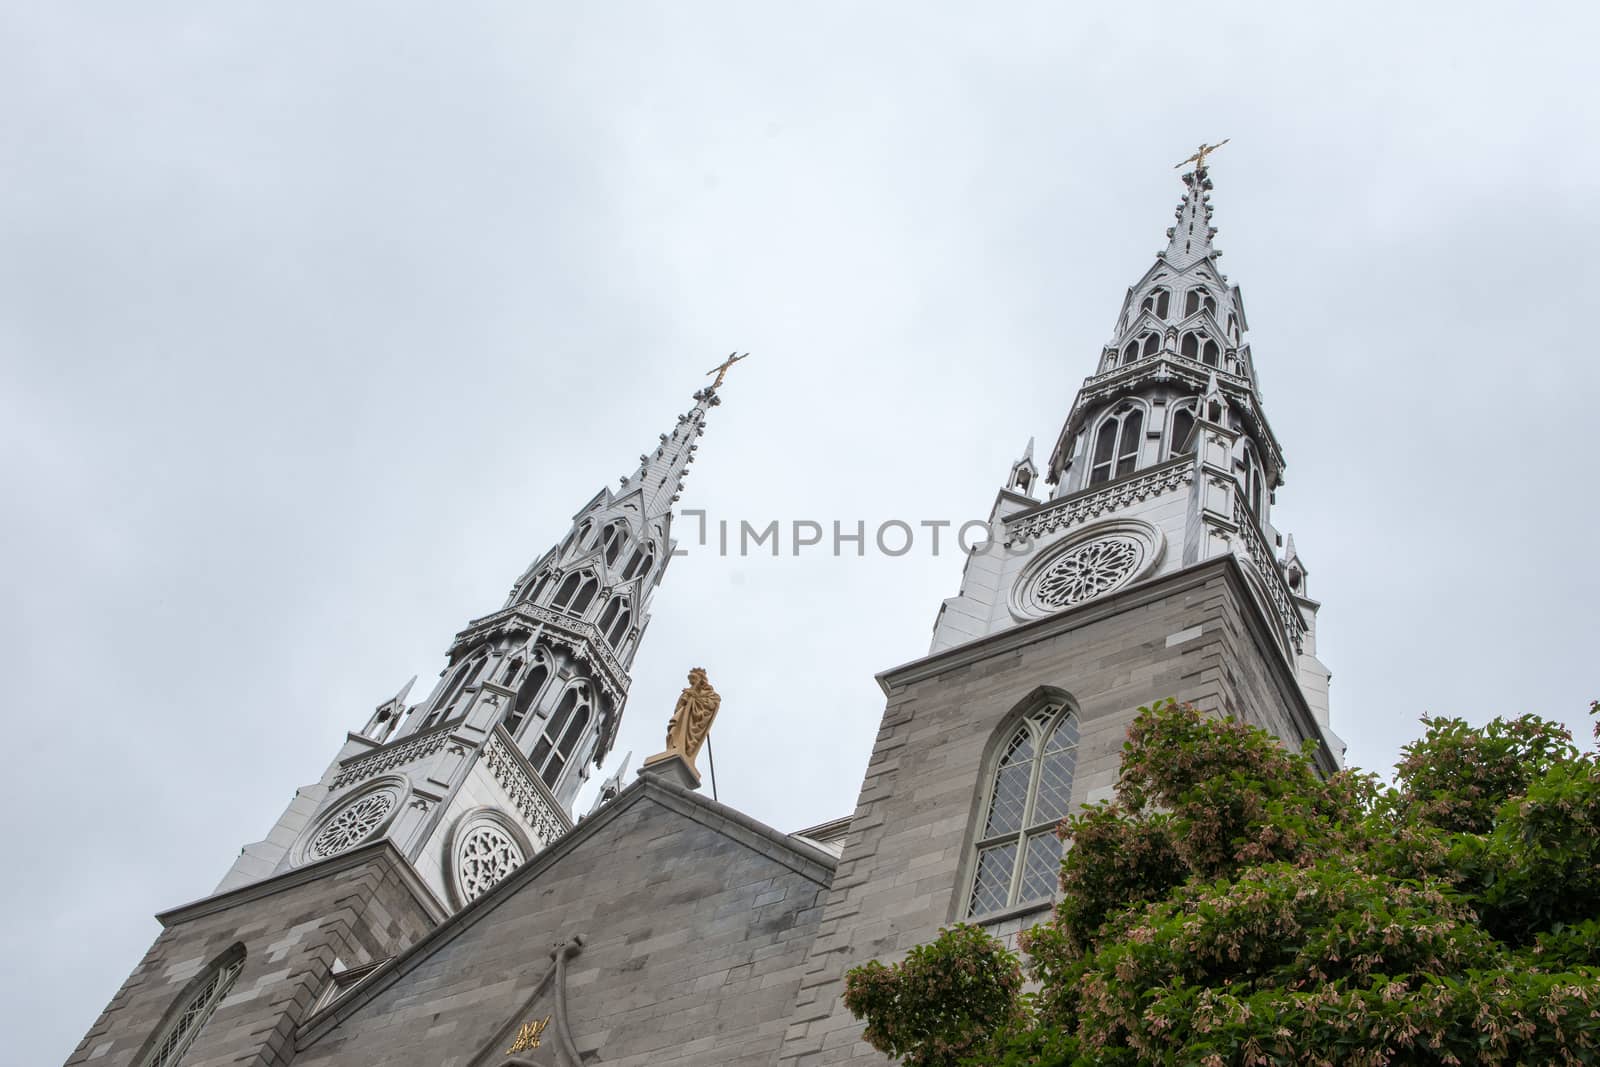 Photo, from below at an angle, of two church domes through the leaves of trees against a cloudy sky